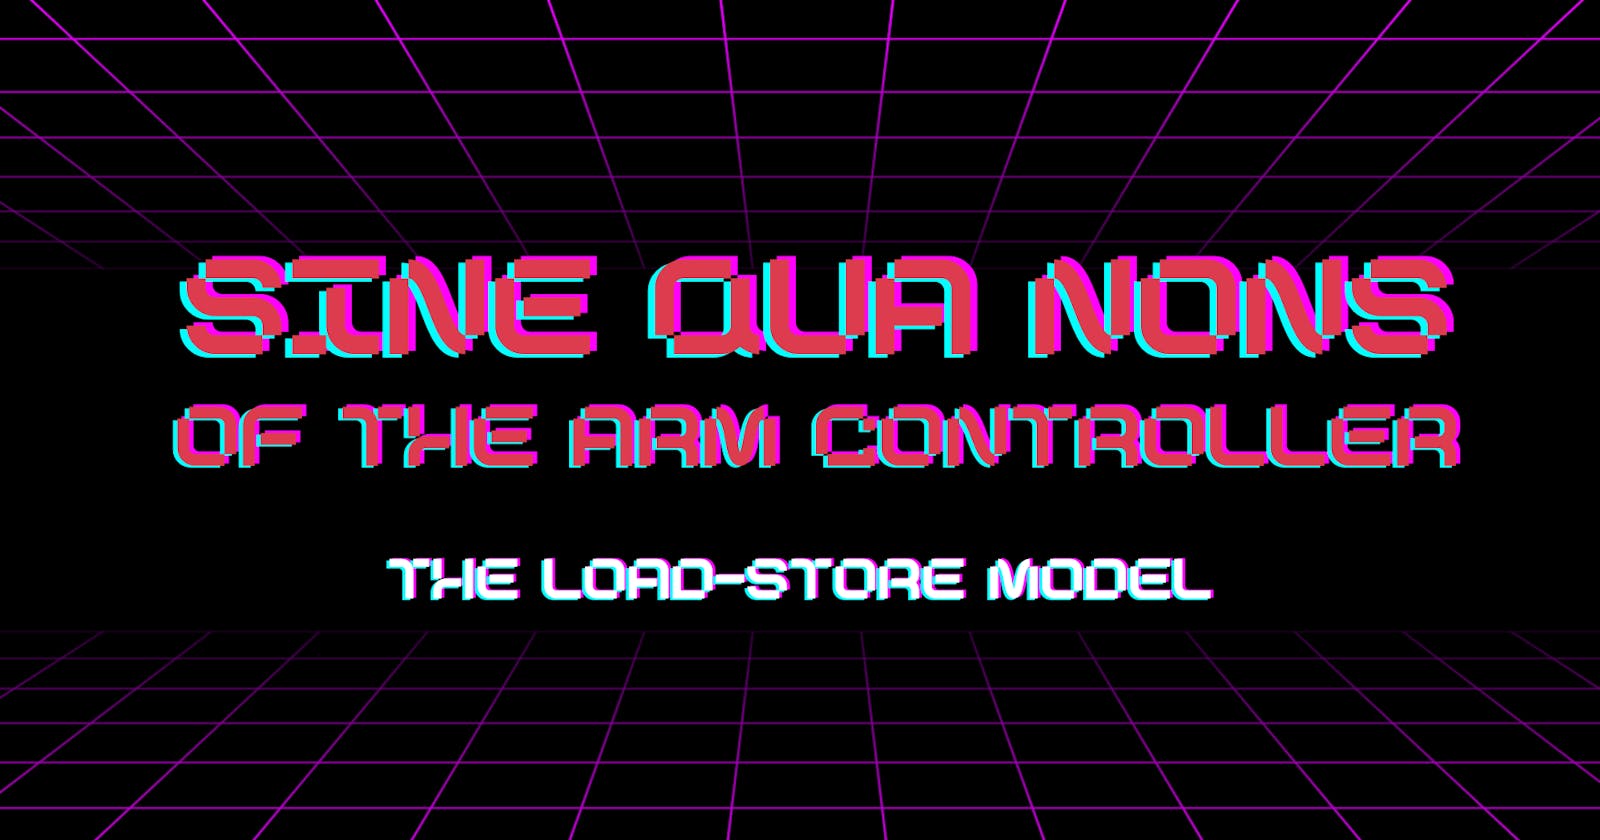 Sine Qua Nons of the ARM Controller - The Load-Store Model